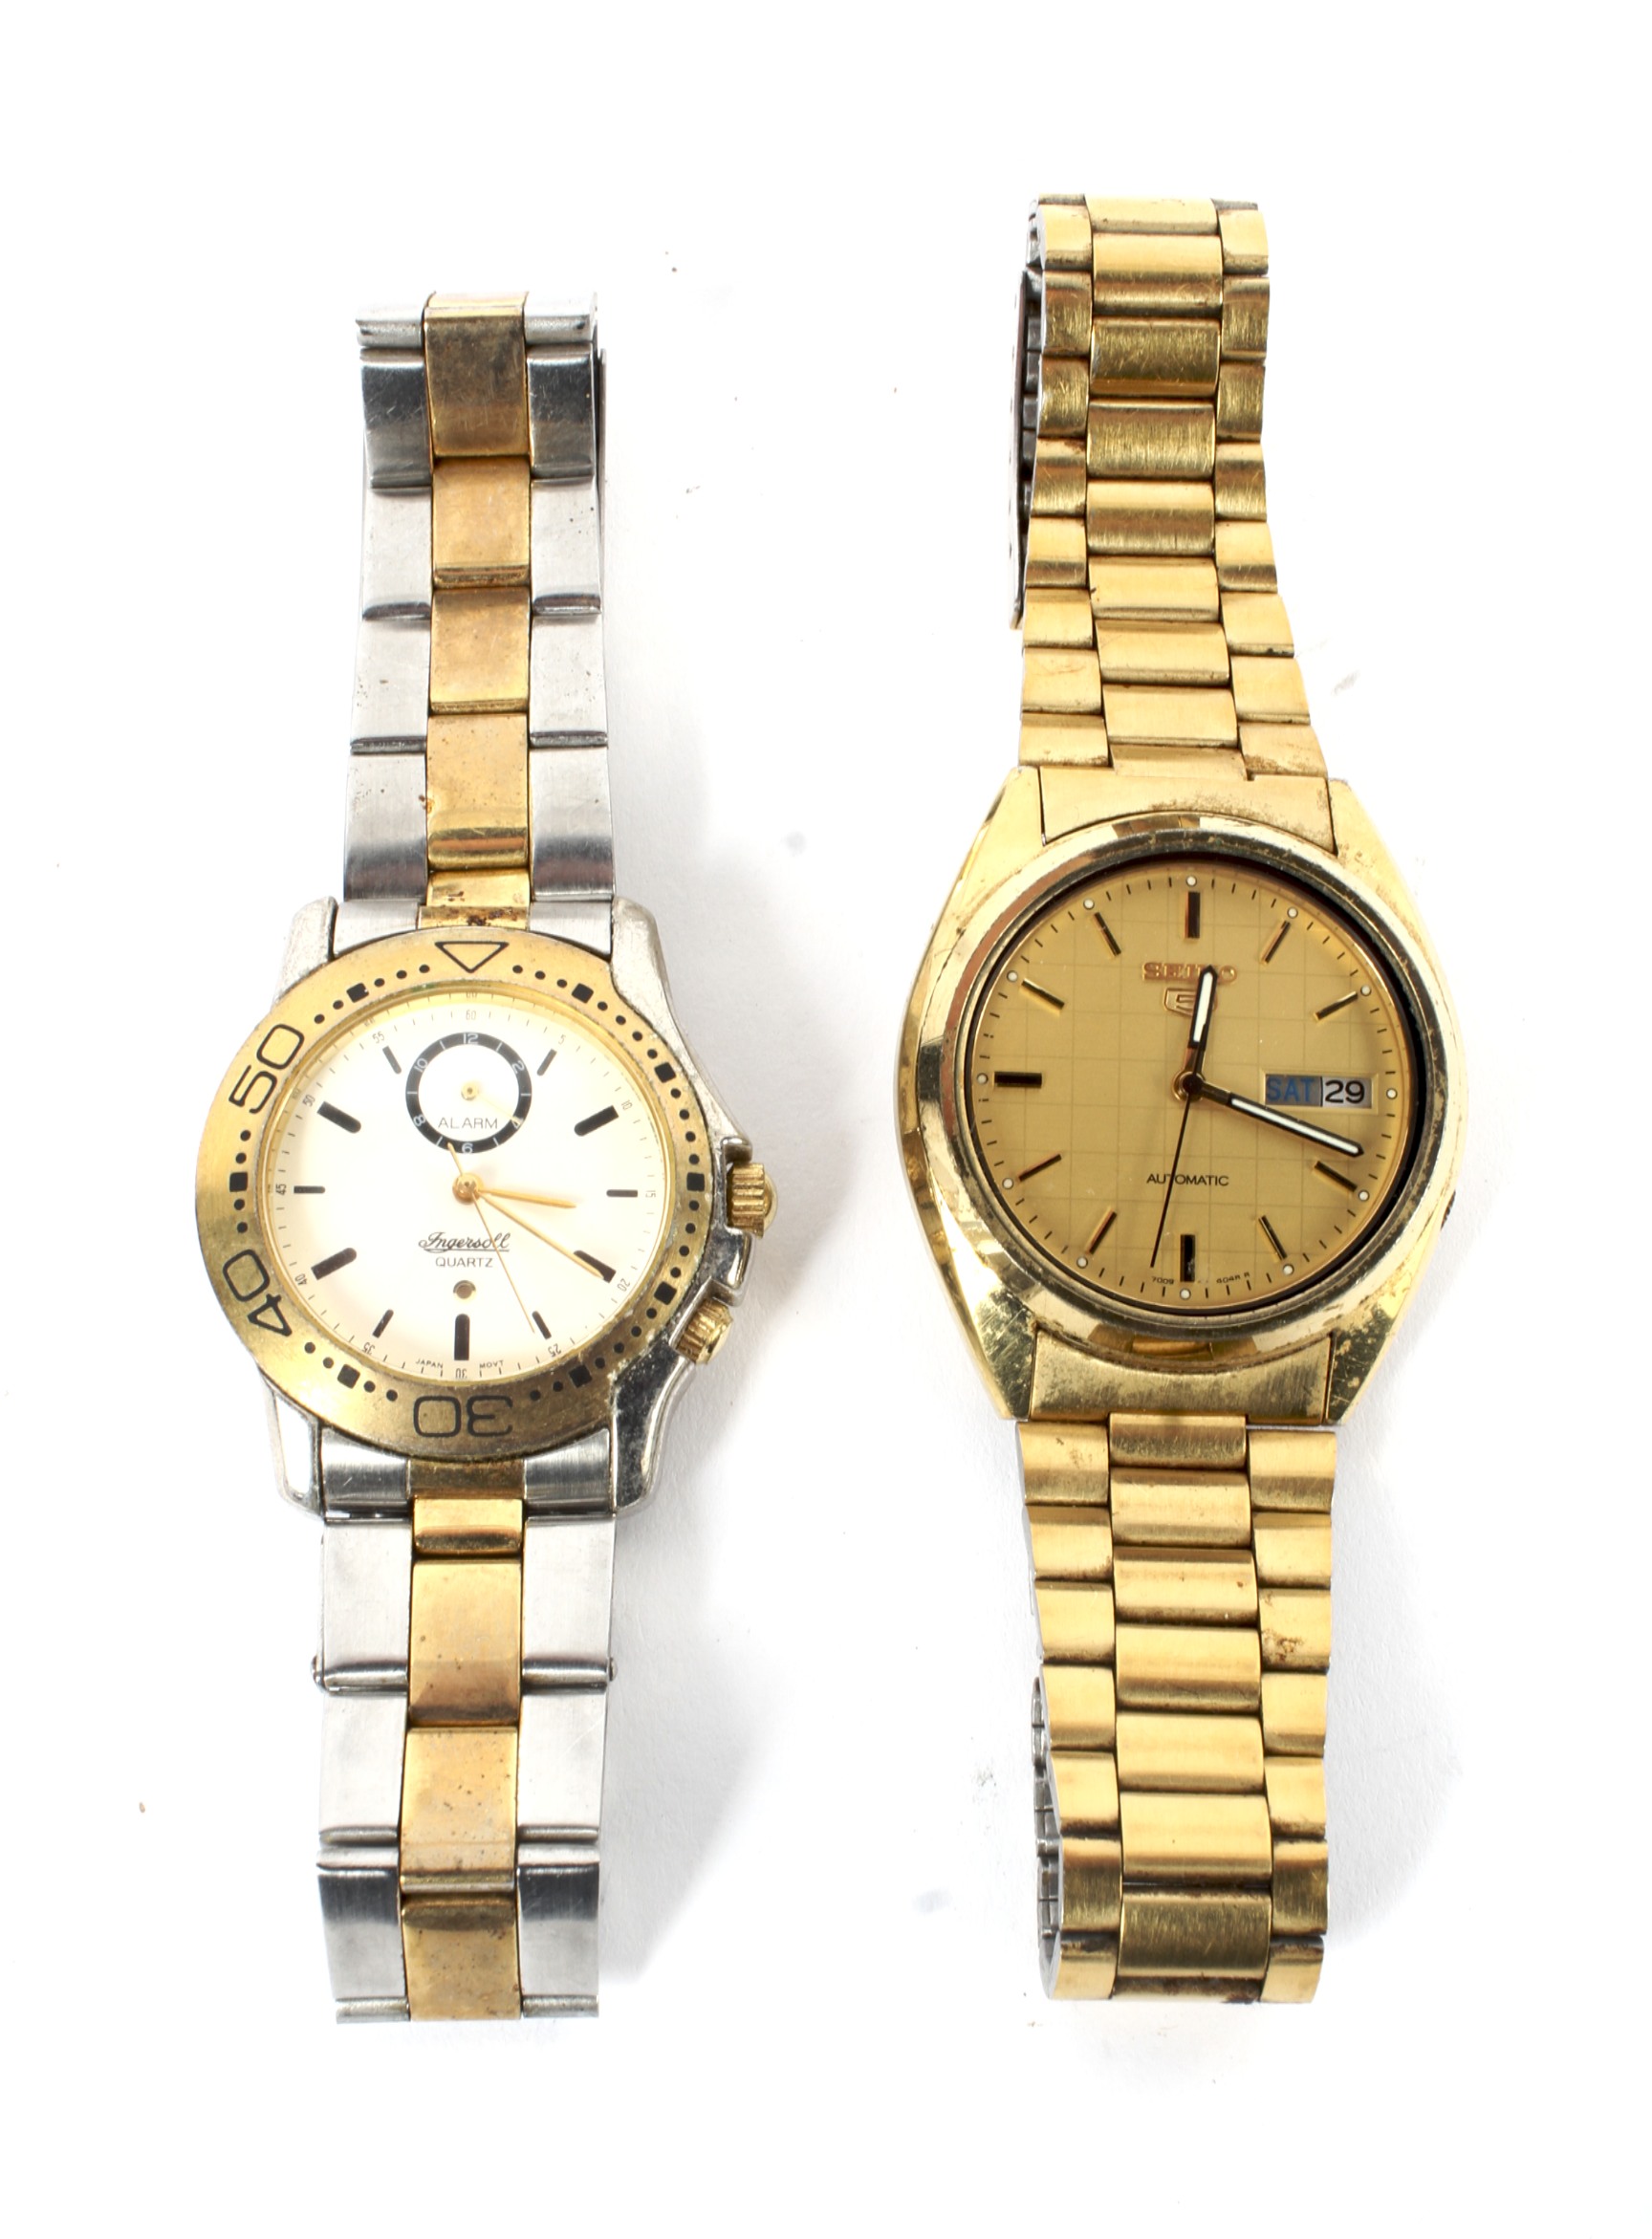 2 gentleman's wrist watches including a Seiko with day and date aperture.